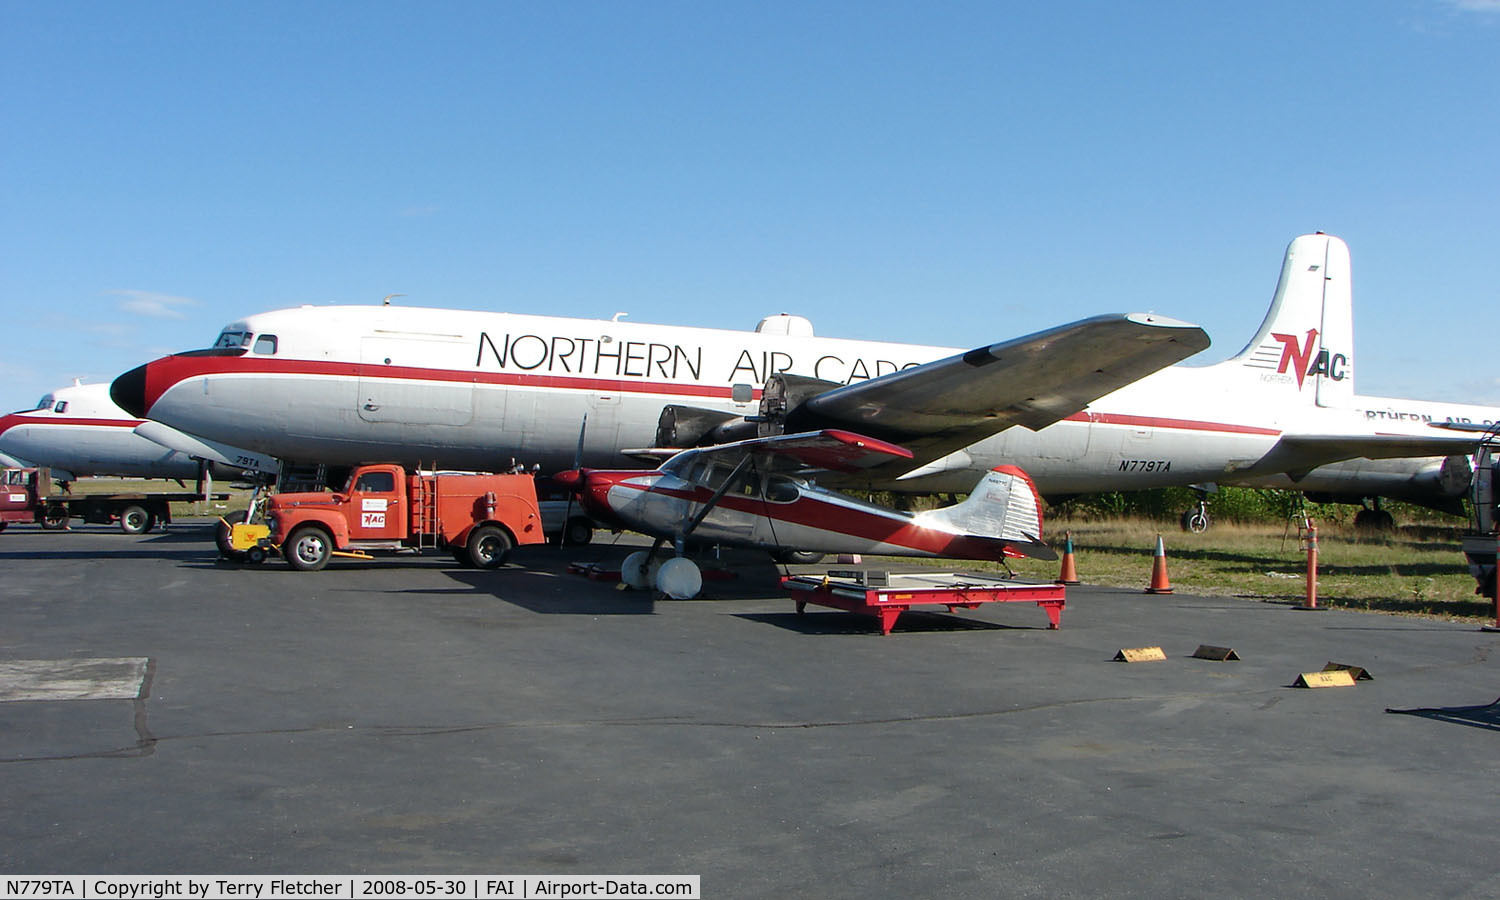 N779TA, 1958 Douglas DC-6A/C C/N 45529, Northern Air Cargo's Dc-6  , now time expired at Fairbanks - this aircraft  operated in Brazil between 1959 and 1978 as PP-LFC